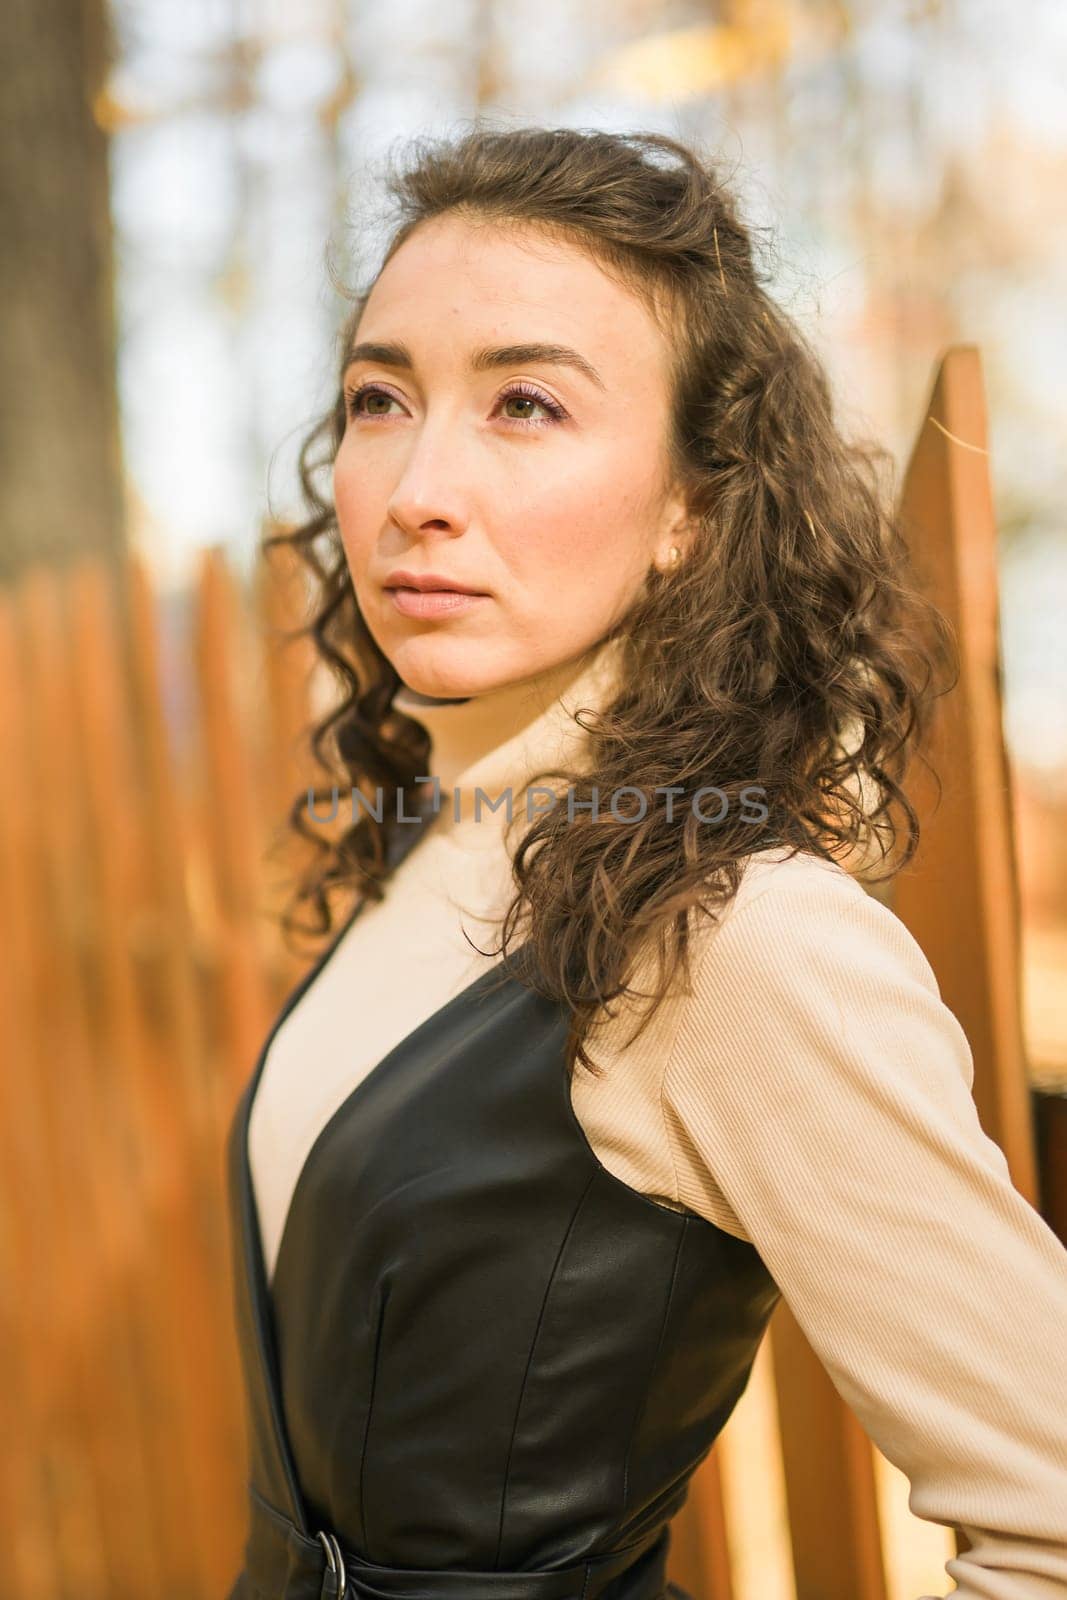 Autumn portrait of a beautiful happy curly woman in fall season. Millennial generation female. Natural beauty